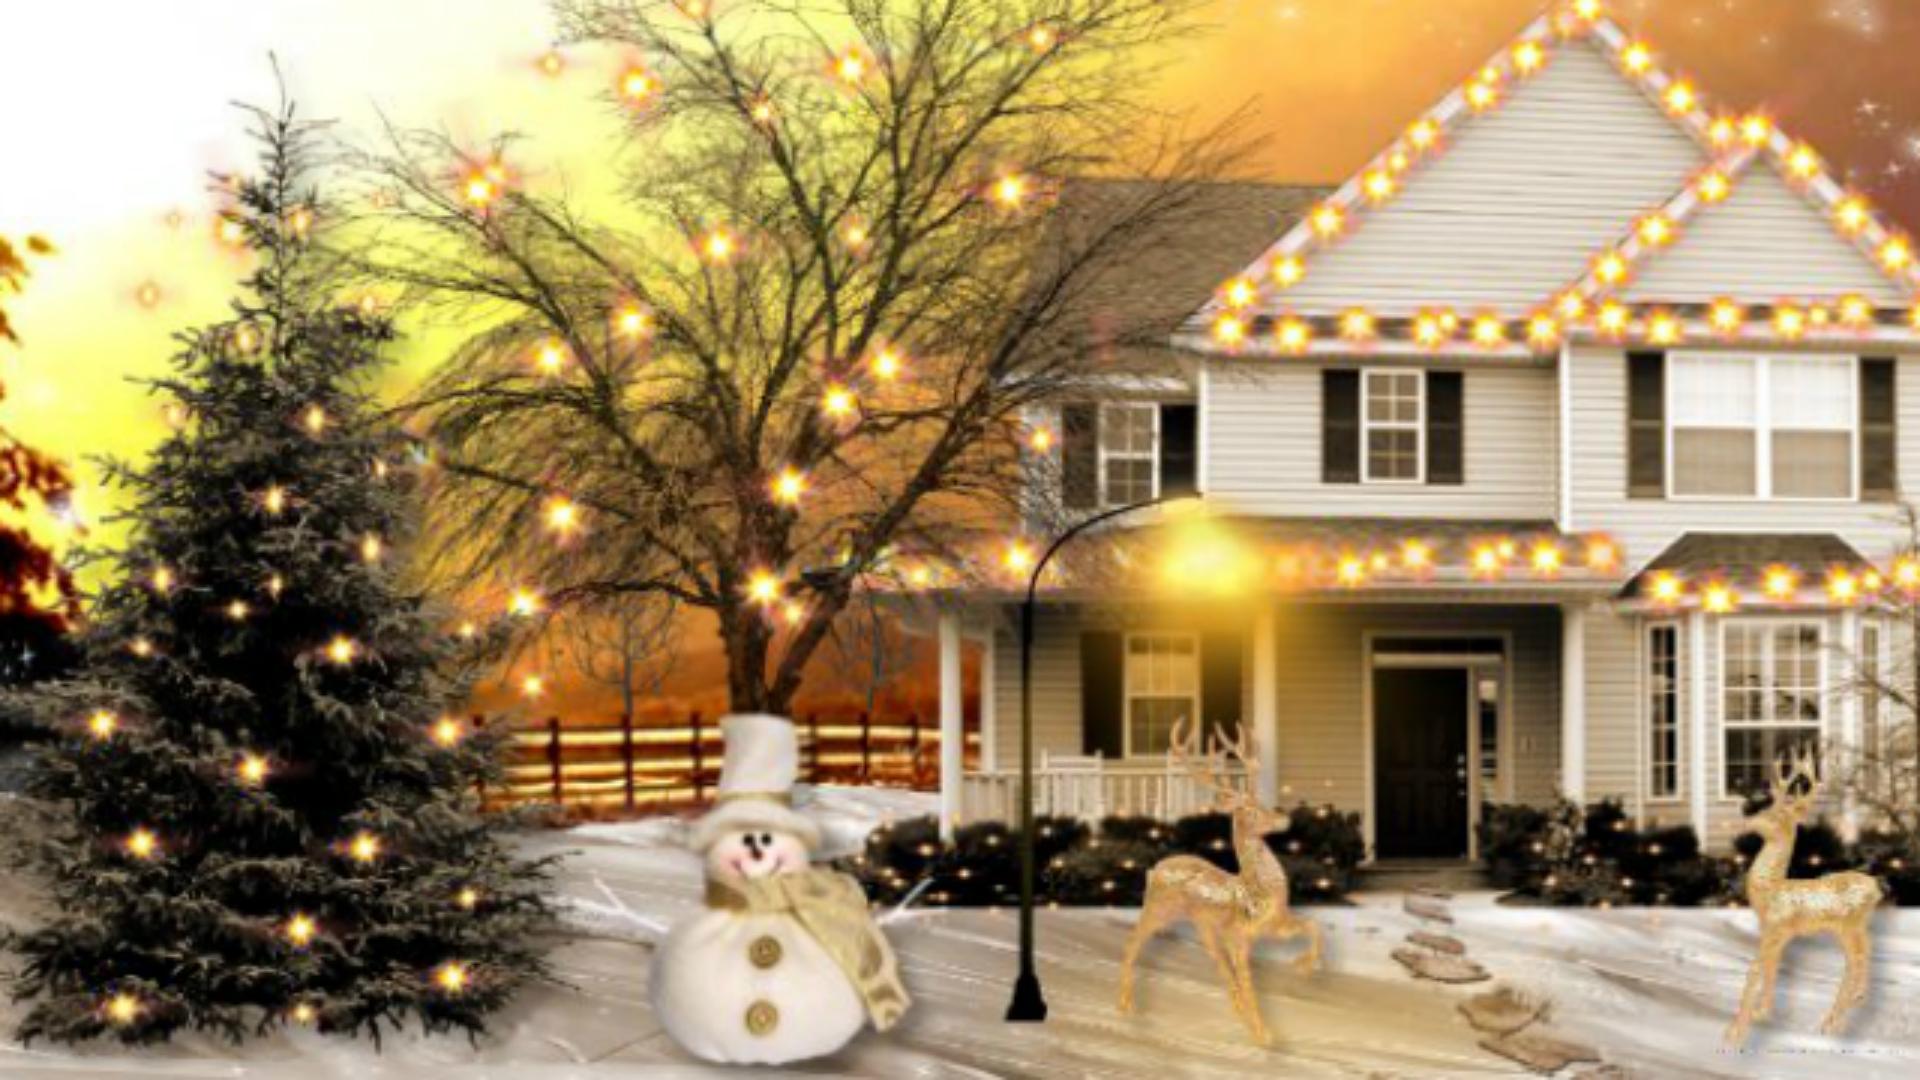 Beautiful Christmas Decoration ~*~ wallpaper | other ...